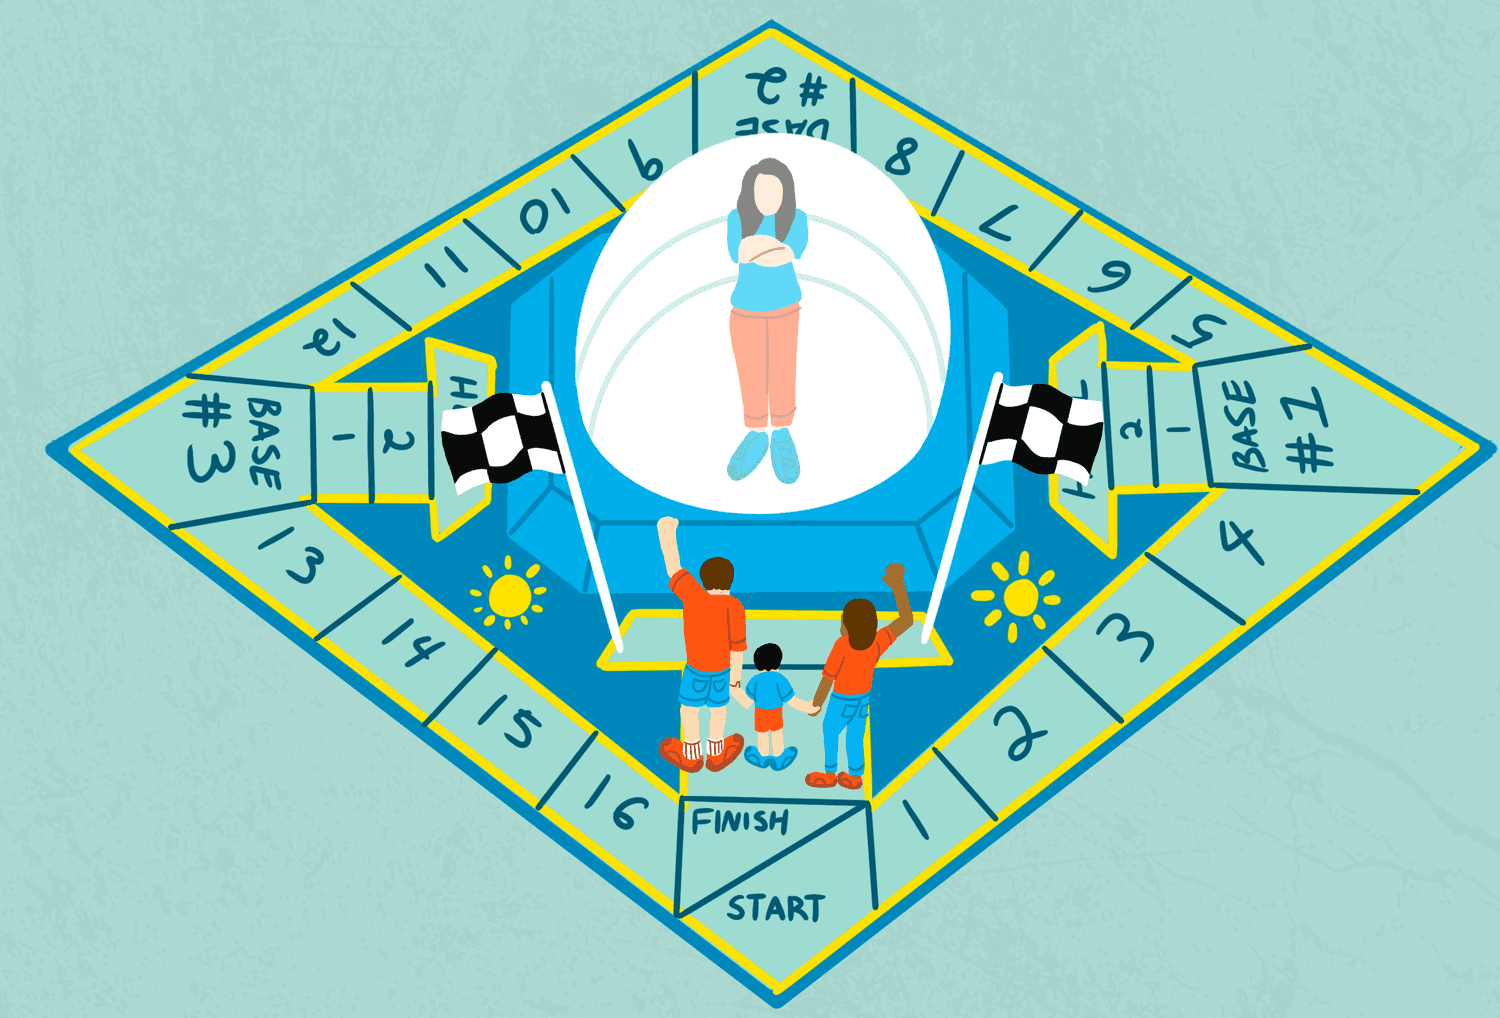 Co-parent trouble game board illustration